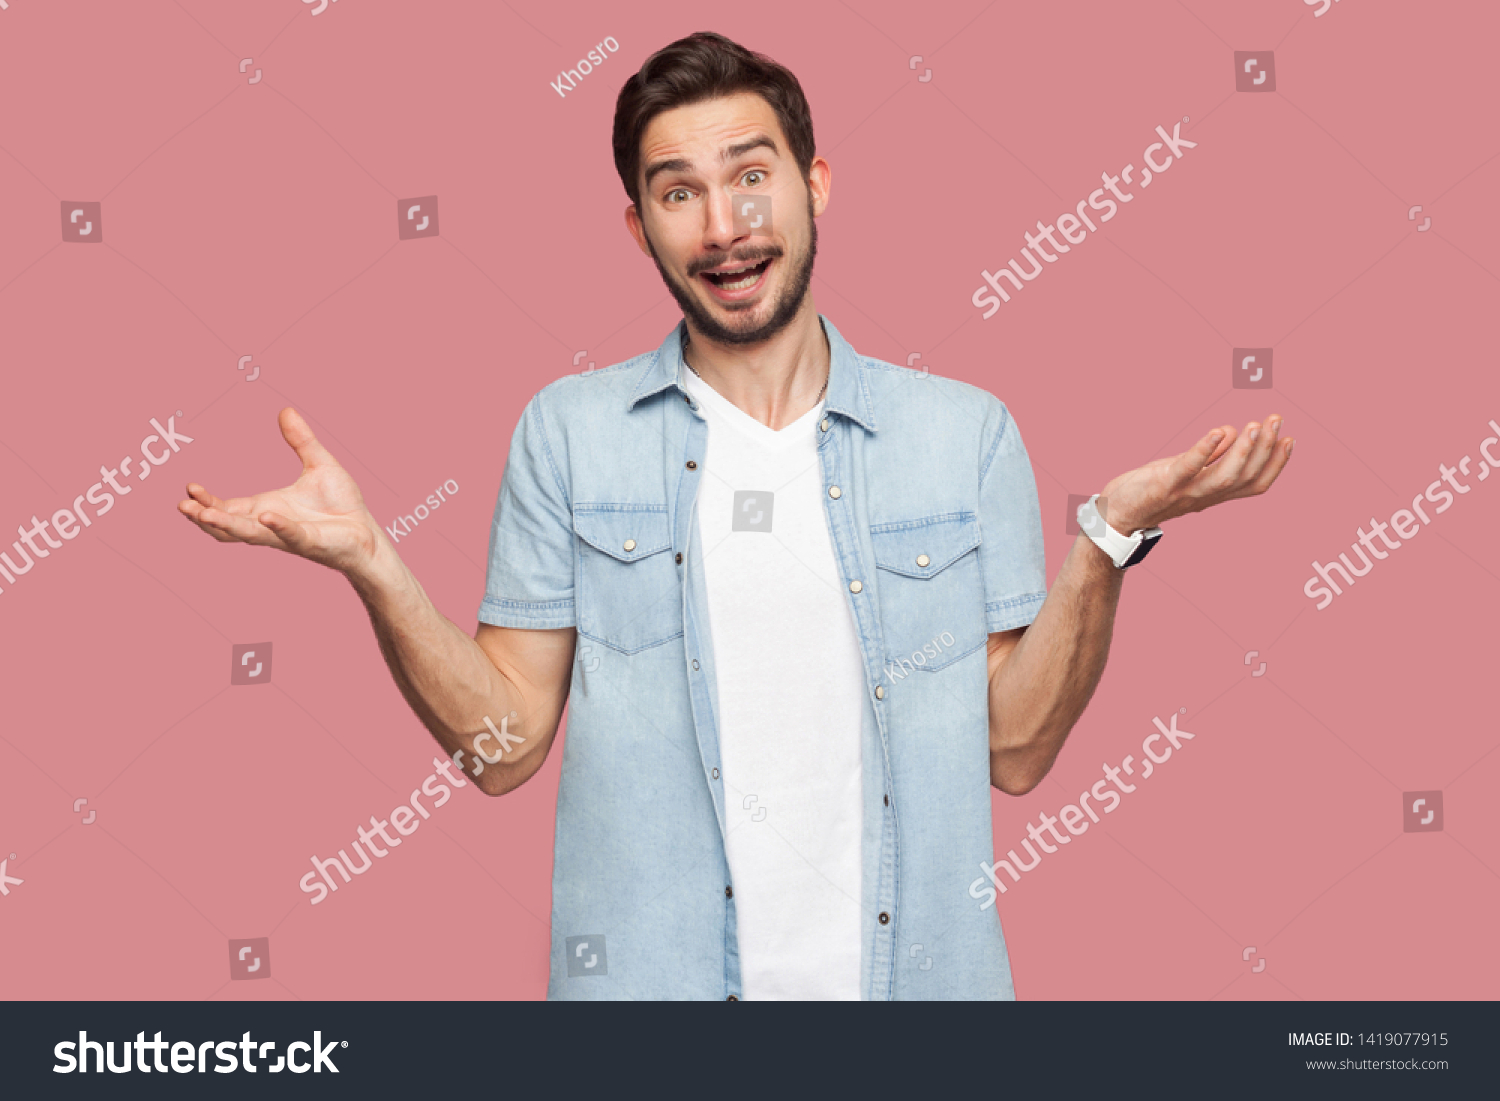 Portrait of surprised handsome bearded young man in blue casual style shirt standing with raised arms and looking at camera with amazed face. indoor studio shot, isolated on pink background. #1419077915